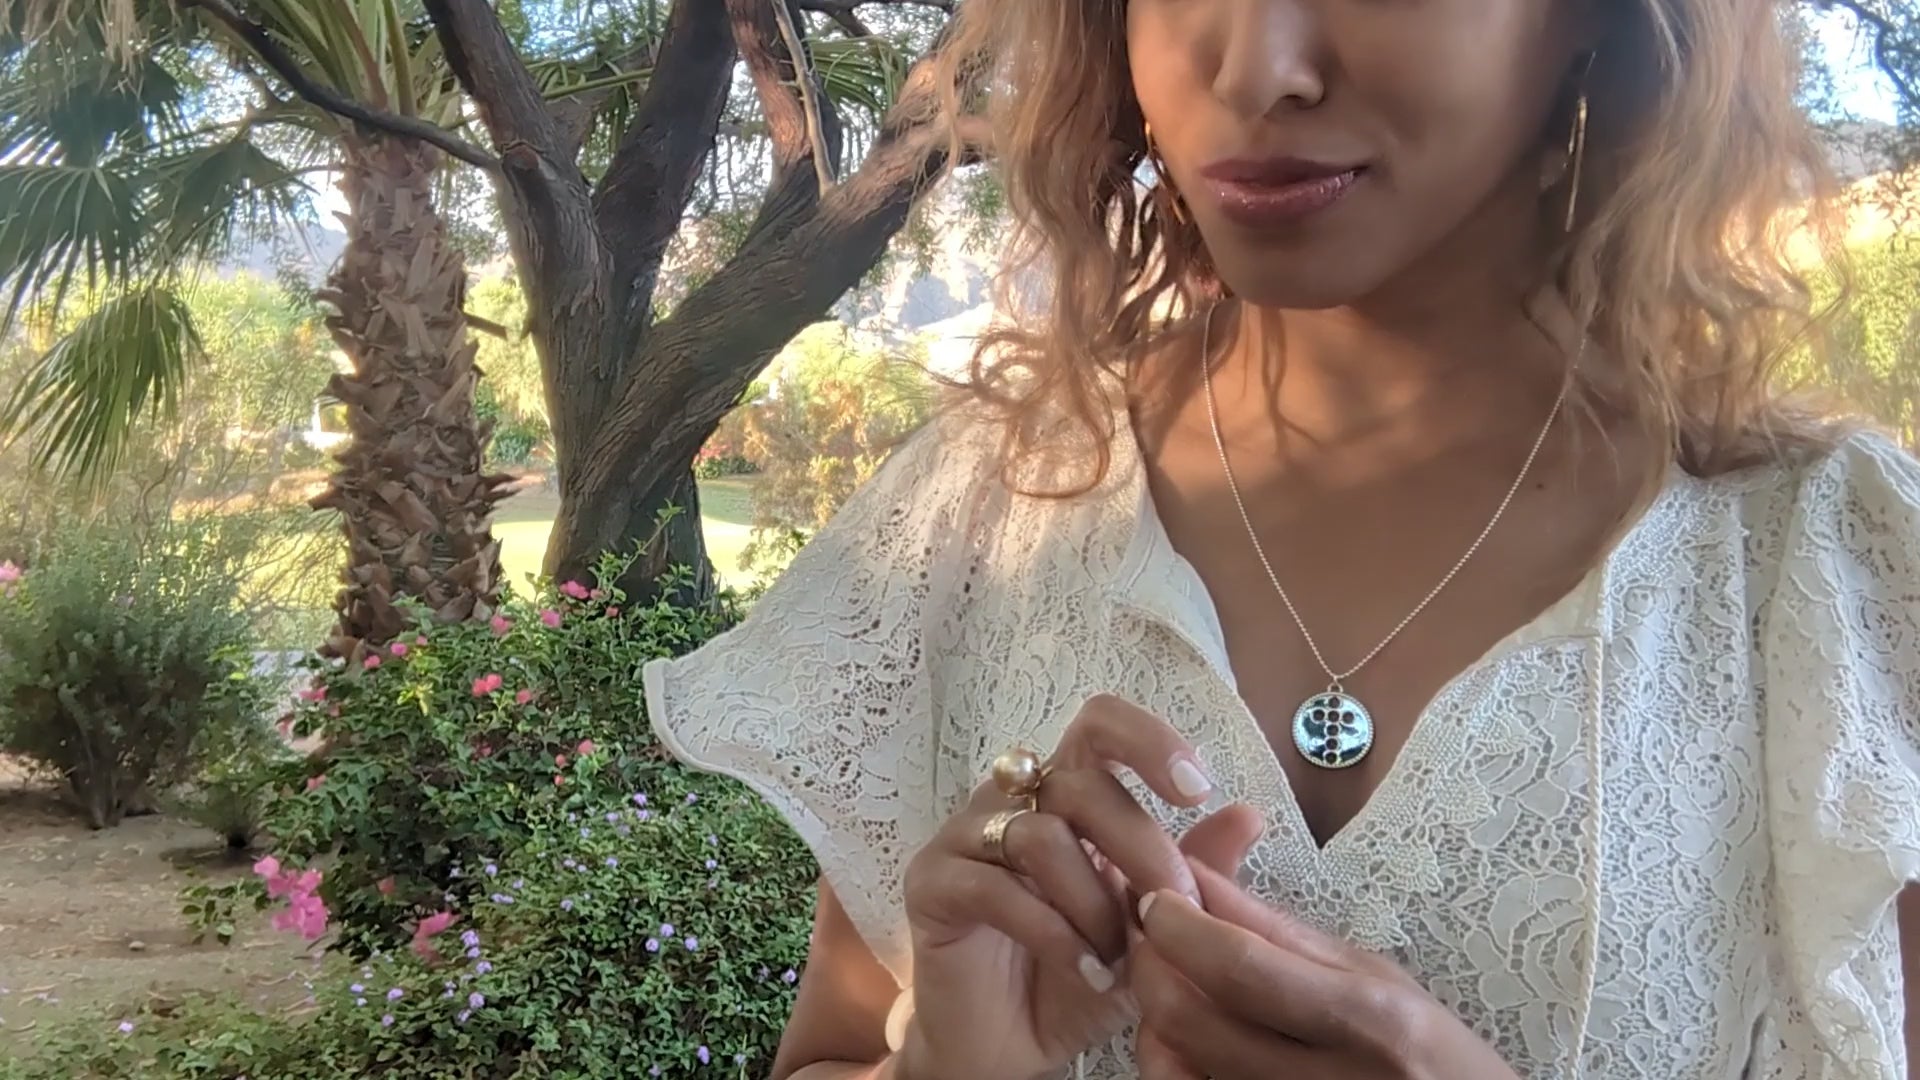 video of woman in white dress in garden wearing the silver cross cutout coin from the wandering jewel